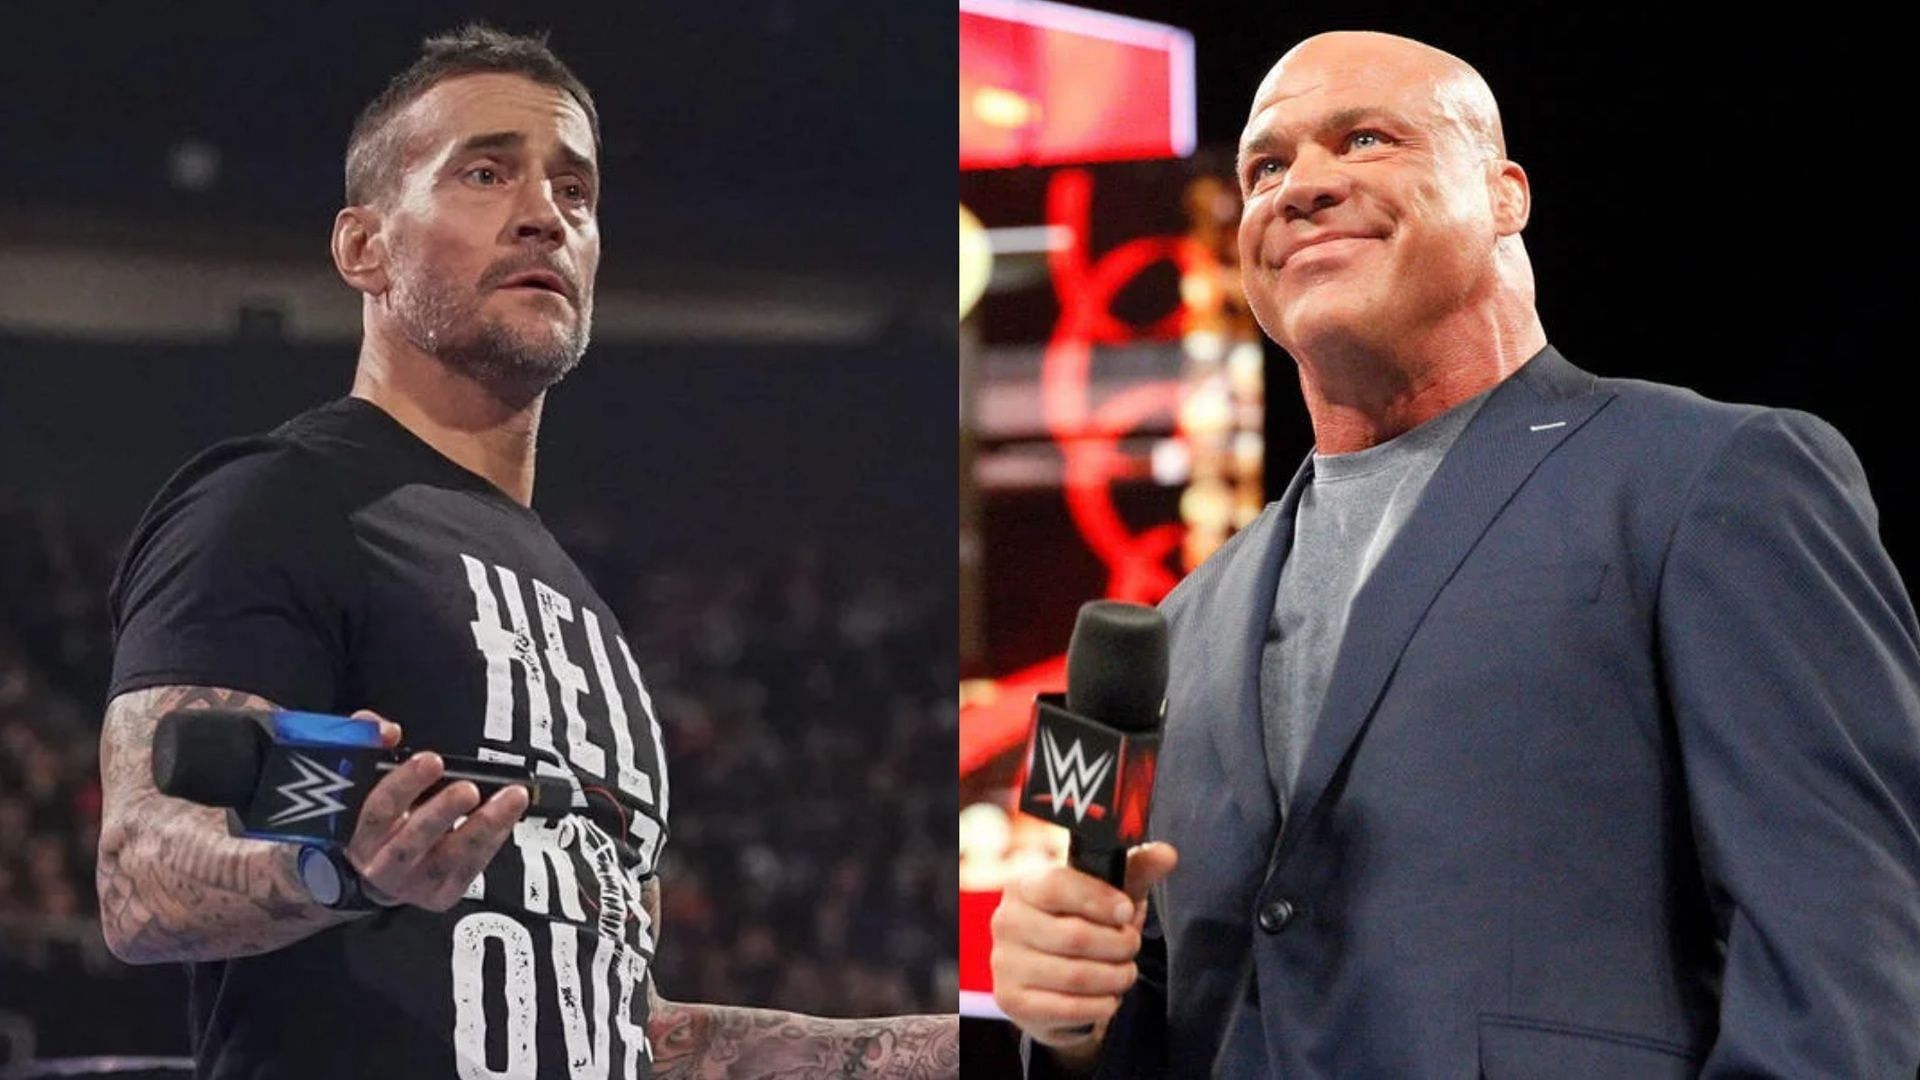 CM Punk might have gotten beaten up by a former WWE superstar, according to Kurt Angle.